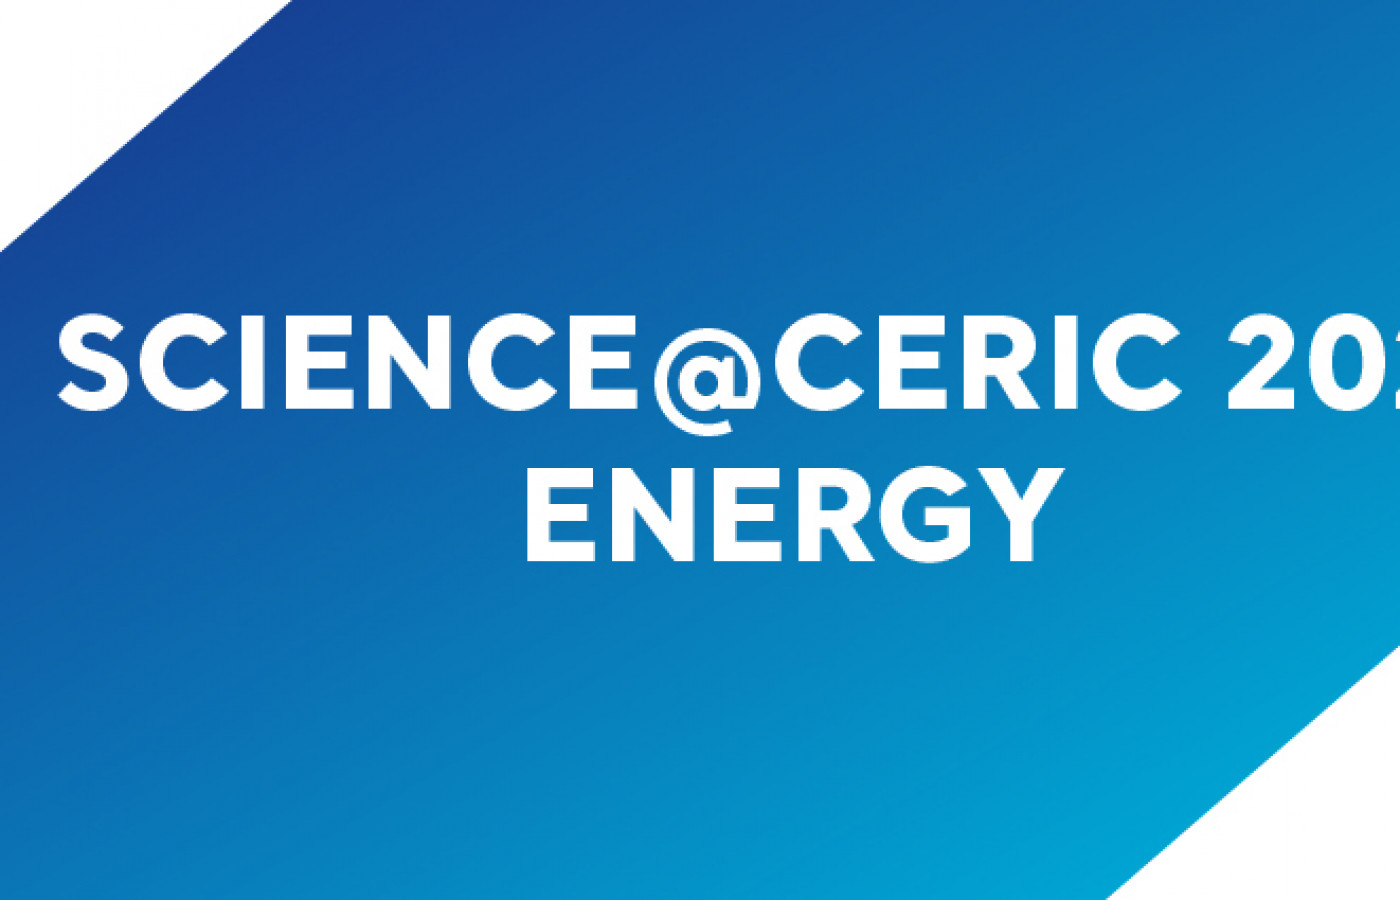 Online CERIC workshop on research in sustainable energy